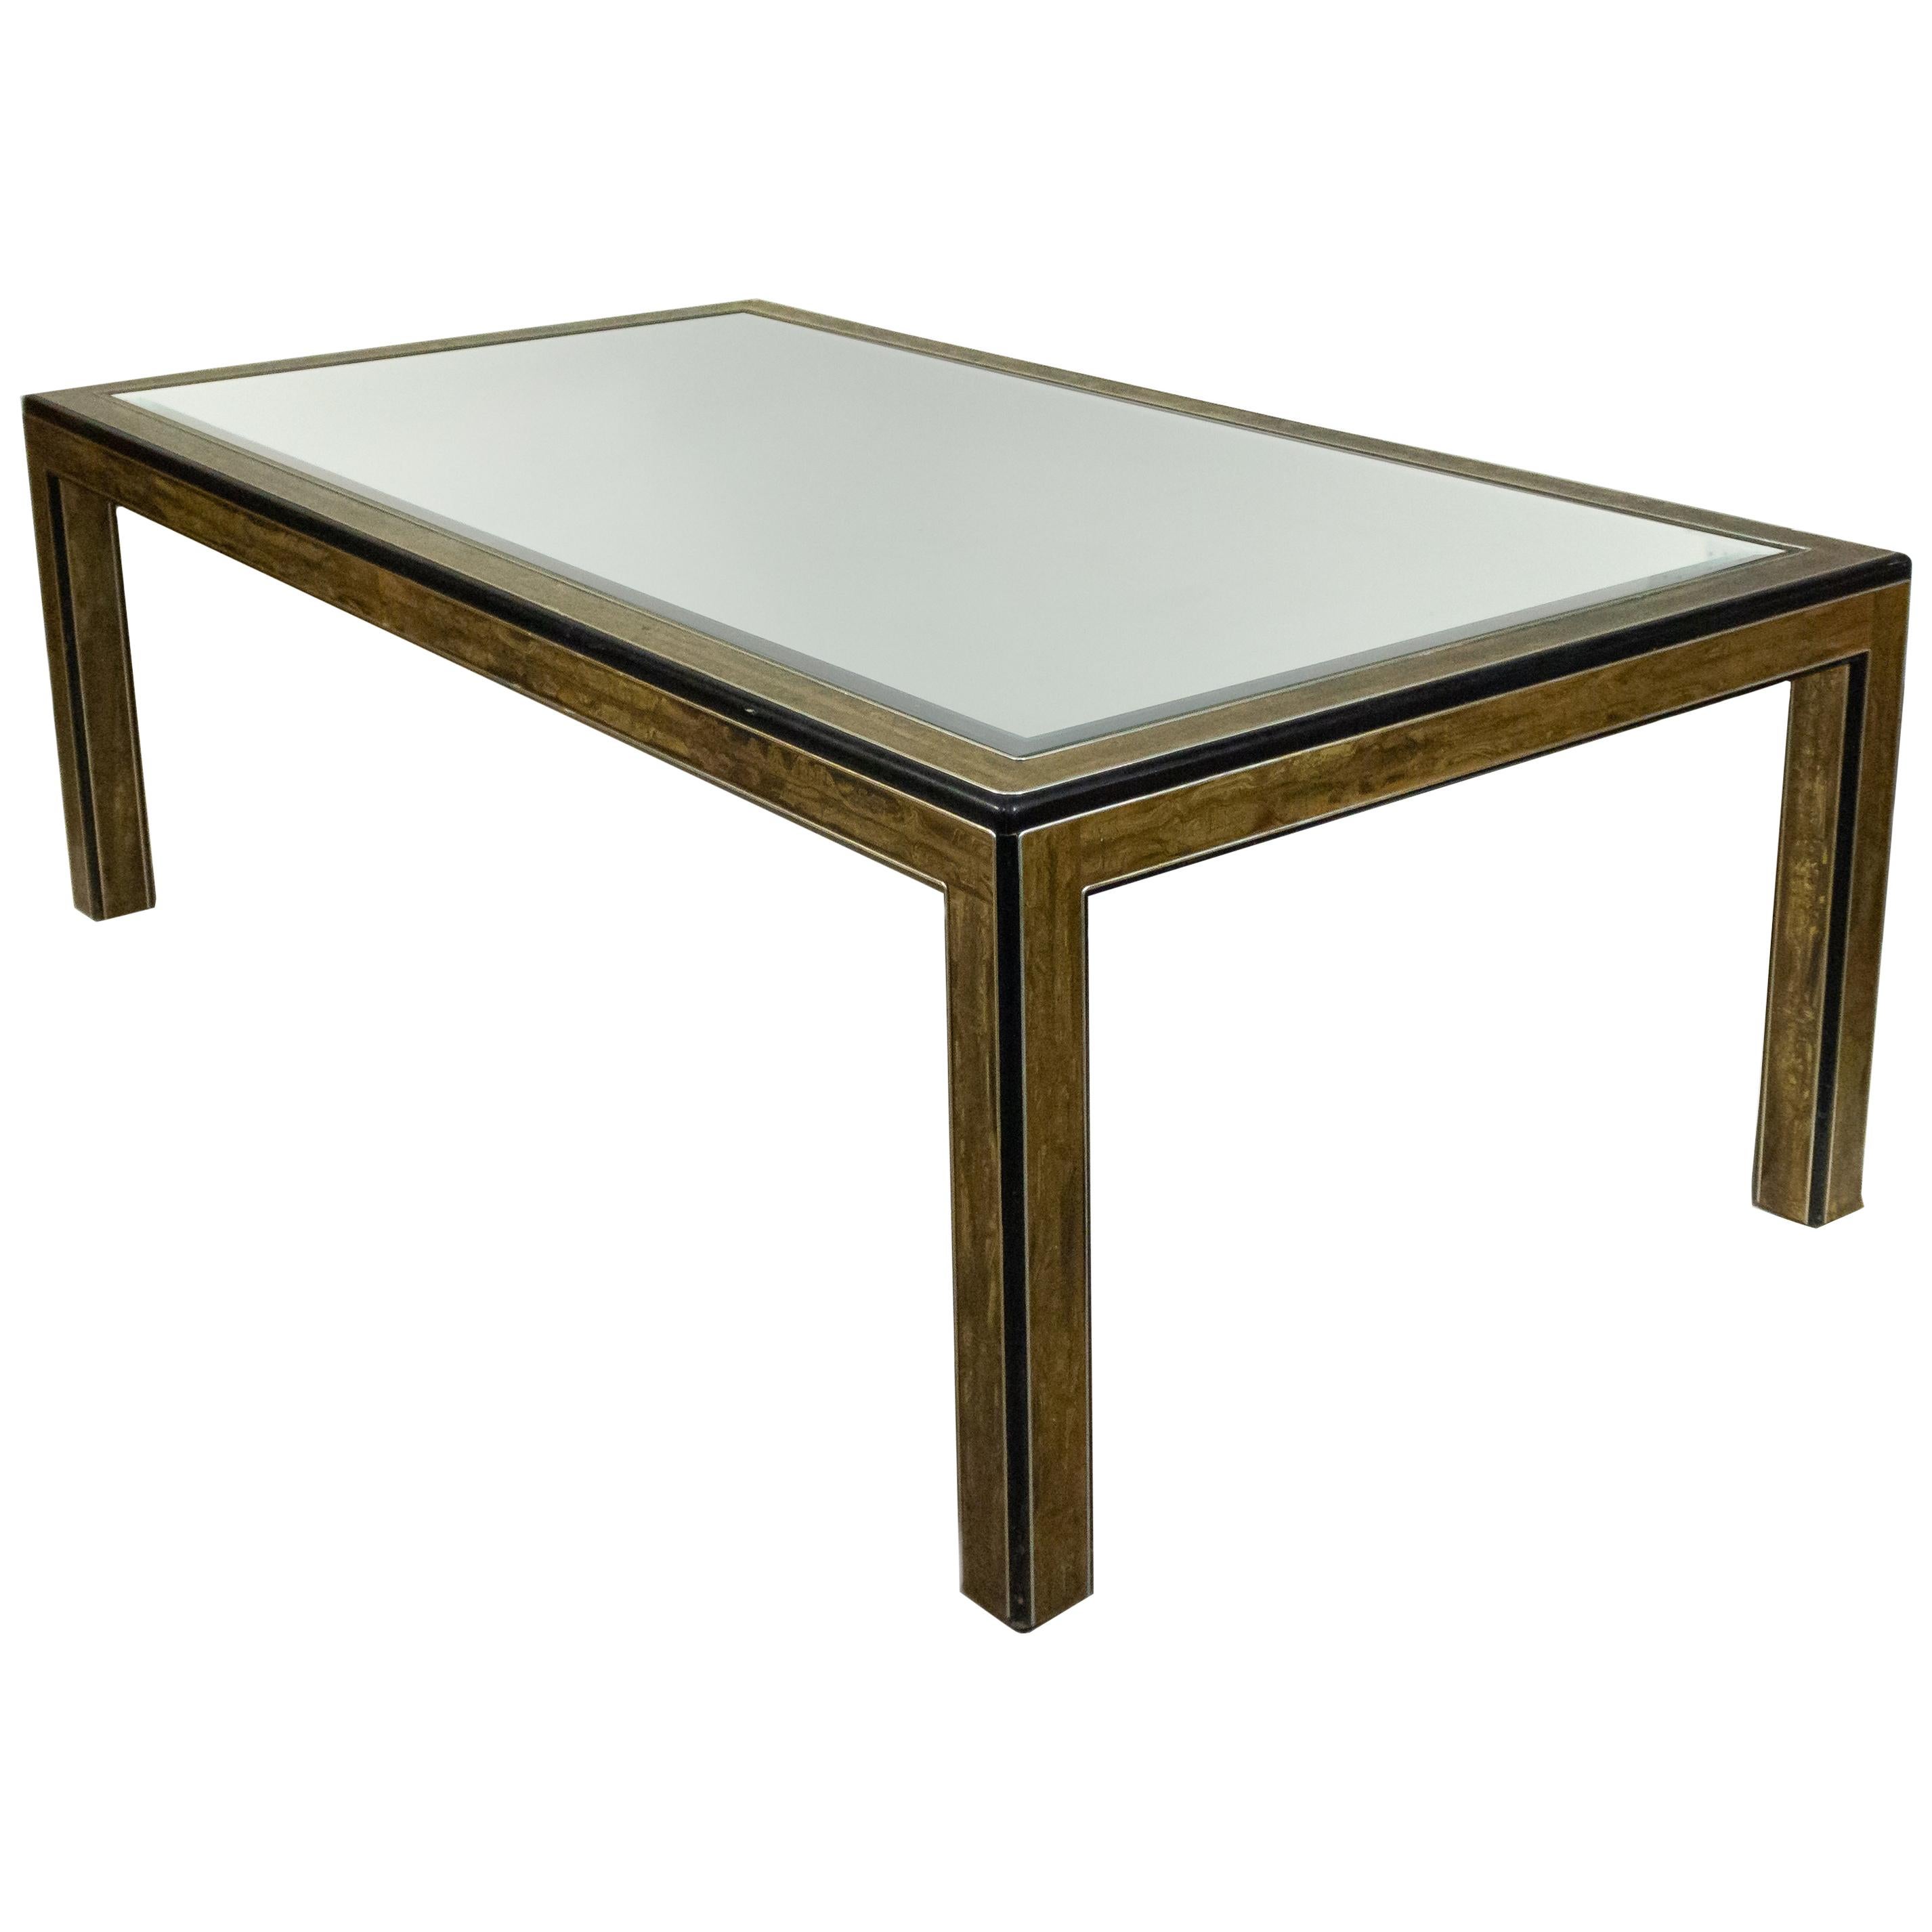 Mastercraft Chinoiserie Dining Table with Mirrored Top